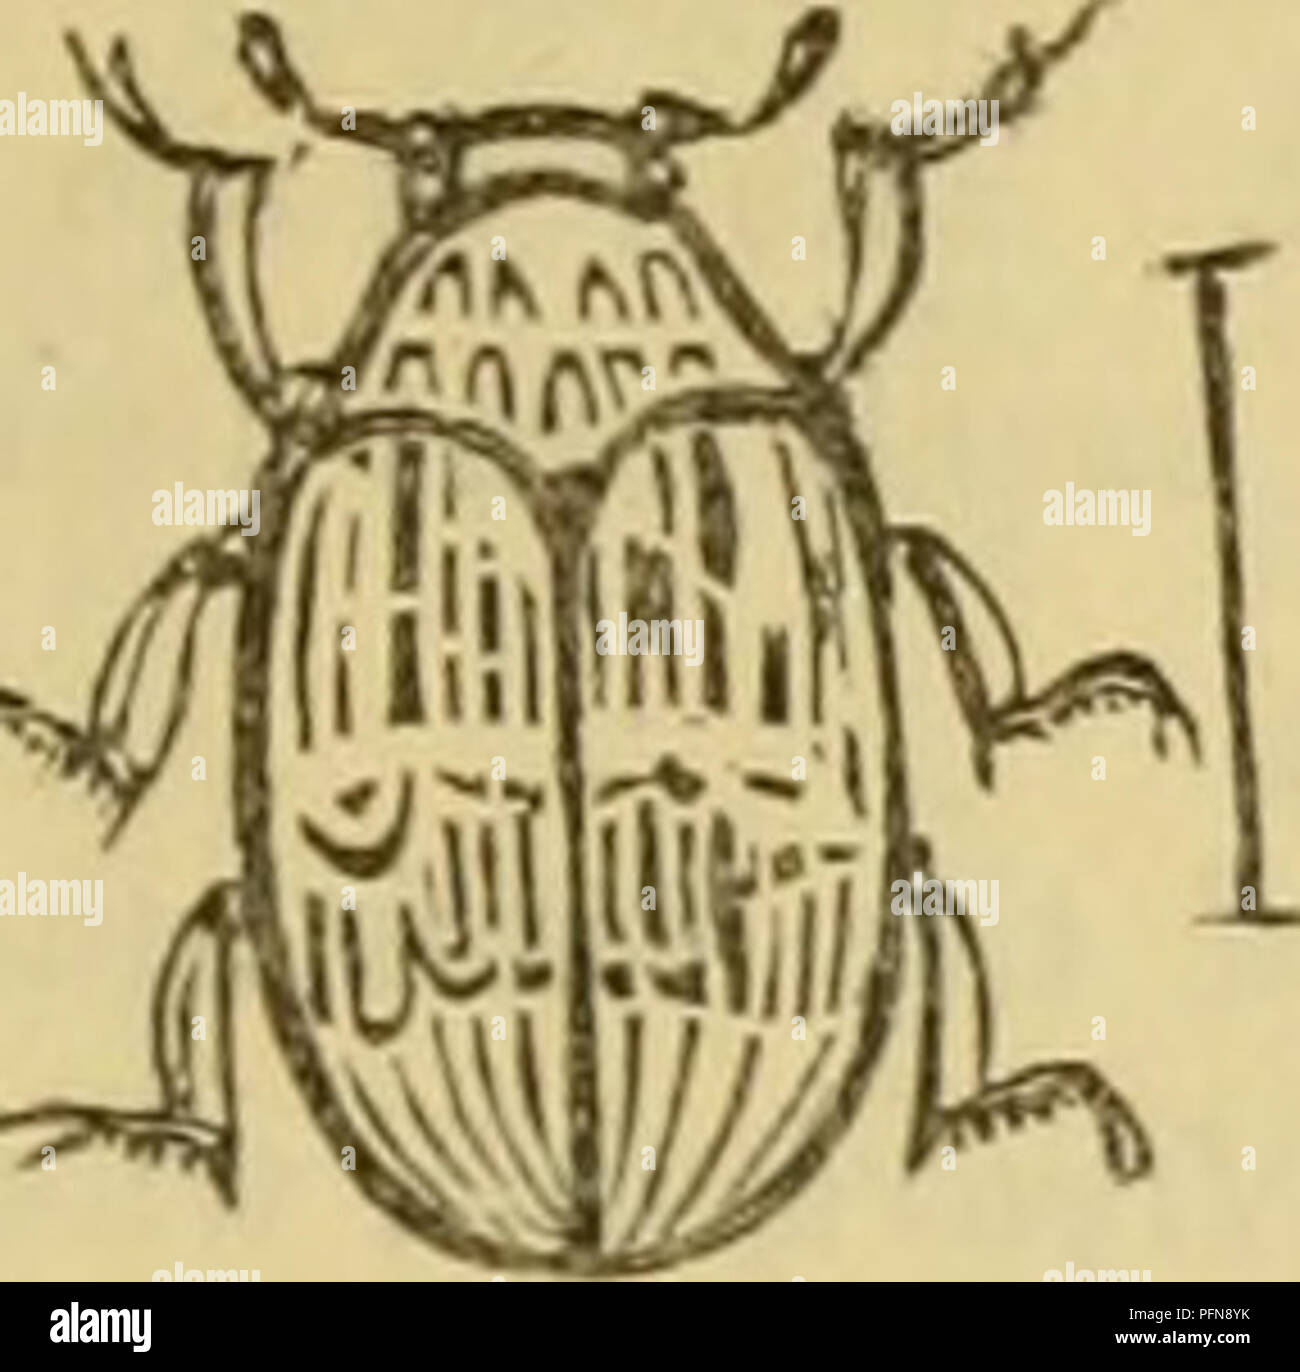 . Cuvier's animal kingdom : arranged according to its organization. Animals. COLEOPTERA. 519. In all the following' subgenera, the antenna; or their clubs are lodged in lateral cavities on the under-side of the thorax. The prostcrnuin is always dilated like a cravat. Attagentis, Latr., has the club of the antennae.very large, lax, and three-jointed, and the body short and slightly convex. Dermestes f^erra, Fab. Trogoderma, Latr., has the club of the antennœ lax, 4-jointed, and the body oblong. Anthrenus elongatus, Fab. Anthrenus, GcolT., has the antennae terminated in a solid obconical mass, l Stock Photo